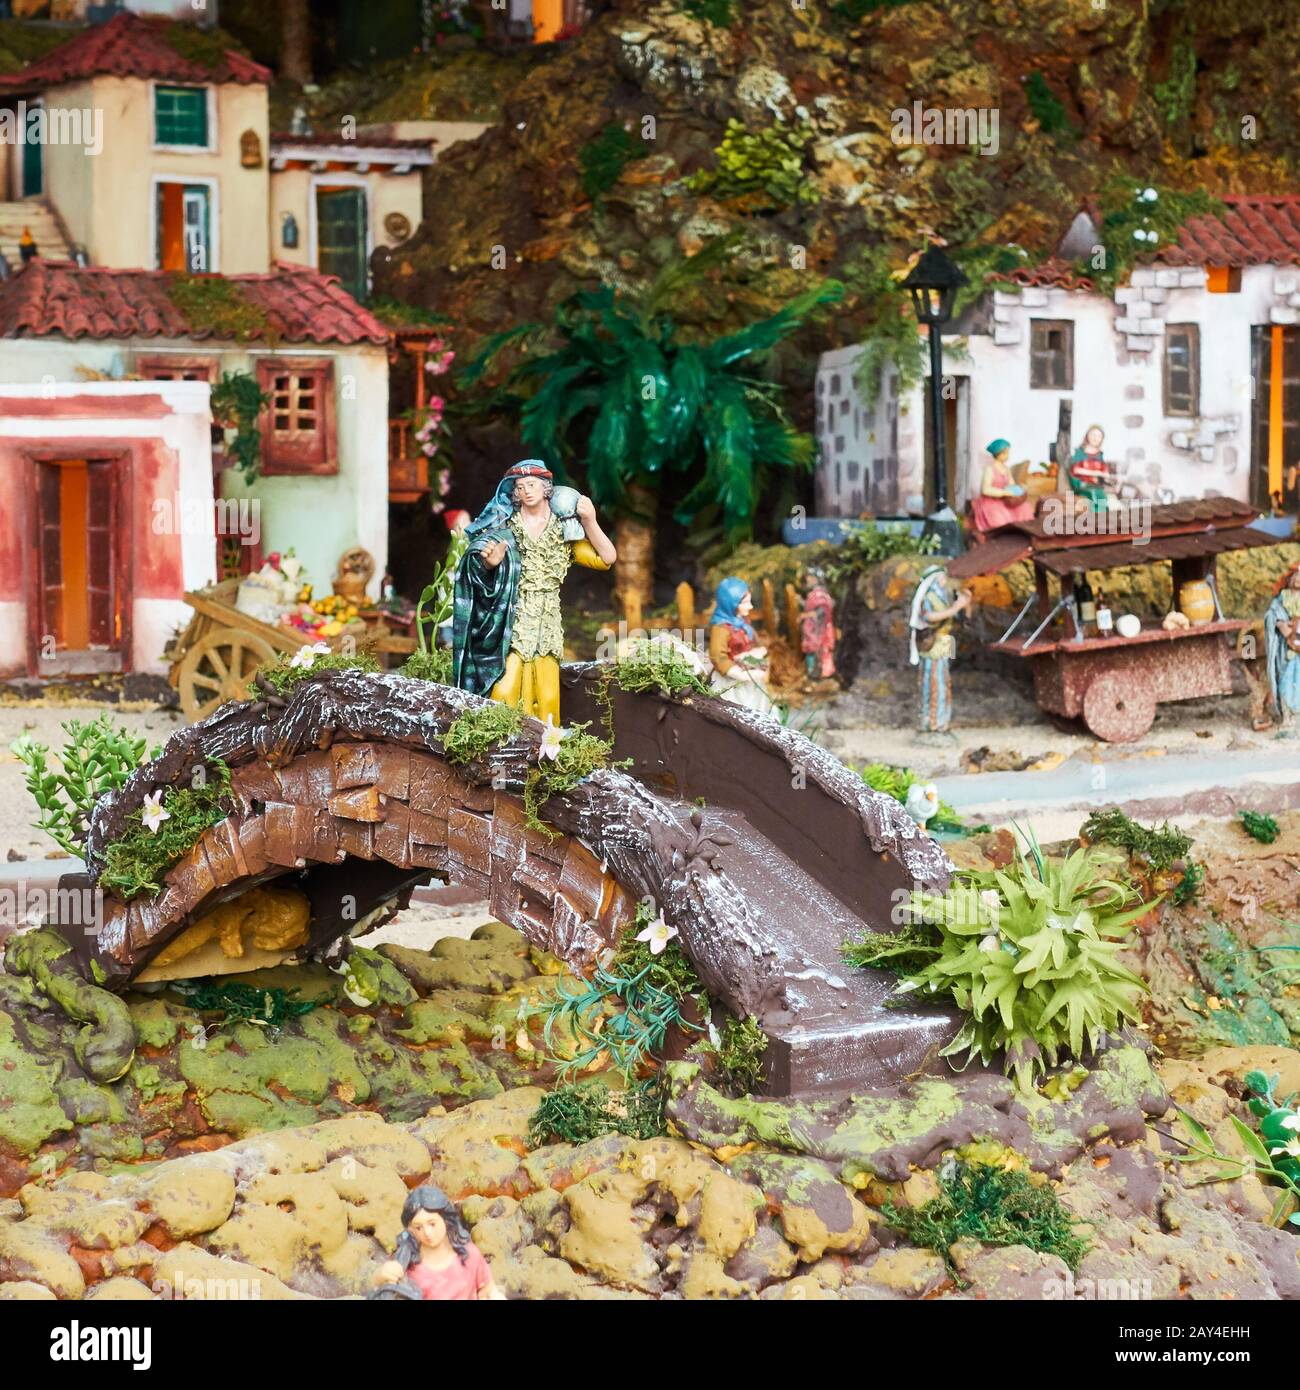 Candelaria, Tenerife, Spain - December 12, 2019: Christmas Belen -  Statuettes of people and houses in miniature depicting life of ancient Bethlehem Stock Photo